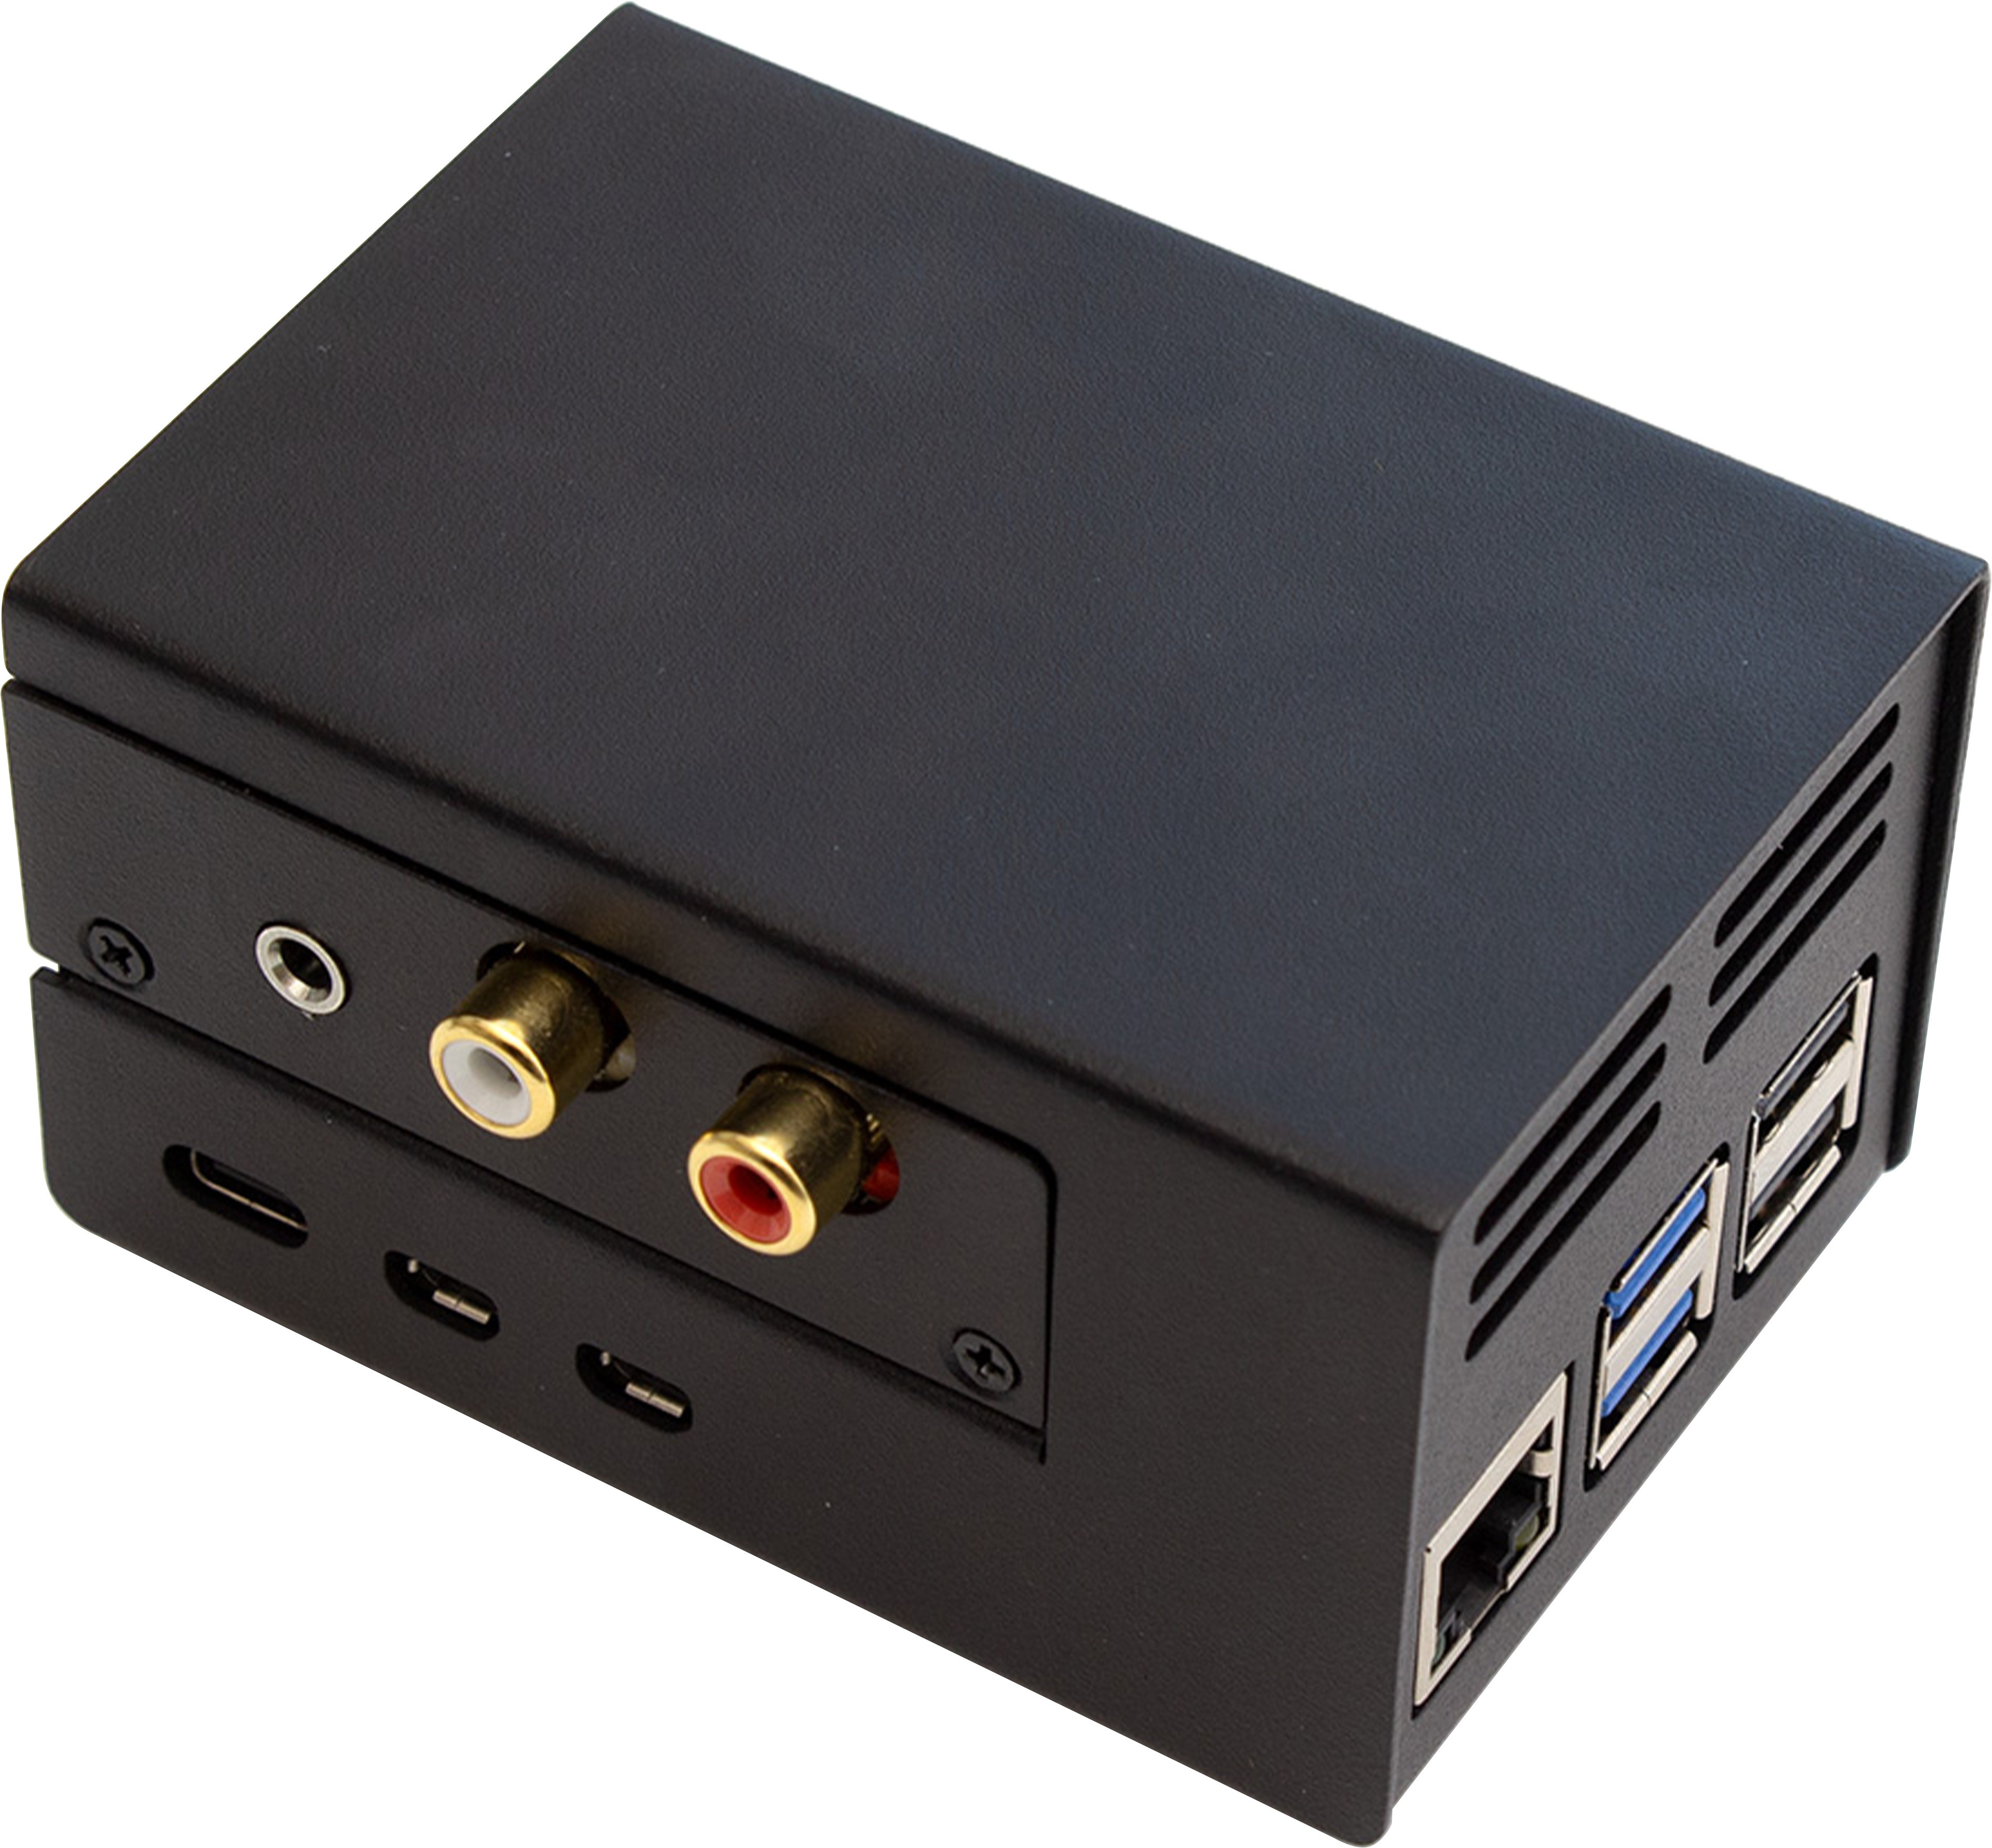 HIFIBERRY Steel Case for Raspberry Pi 5 and HiFiBerry Modules